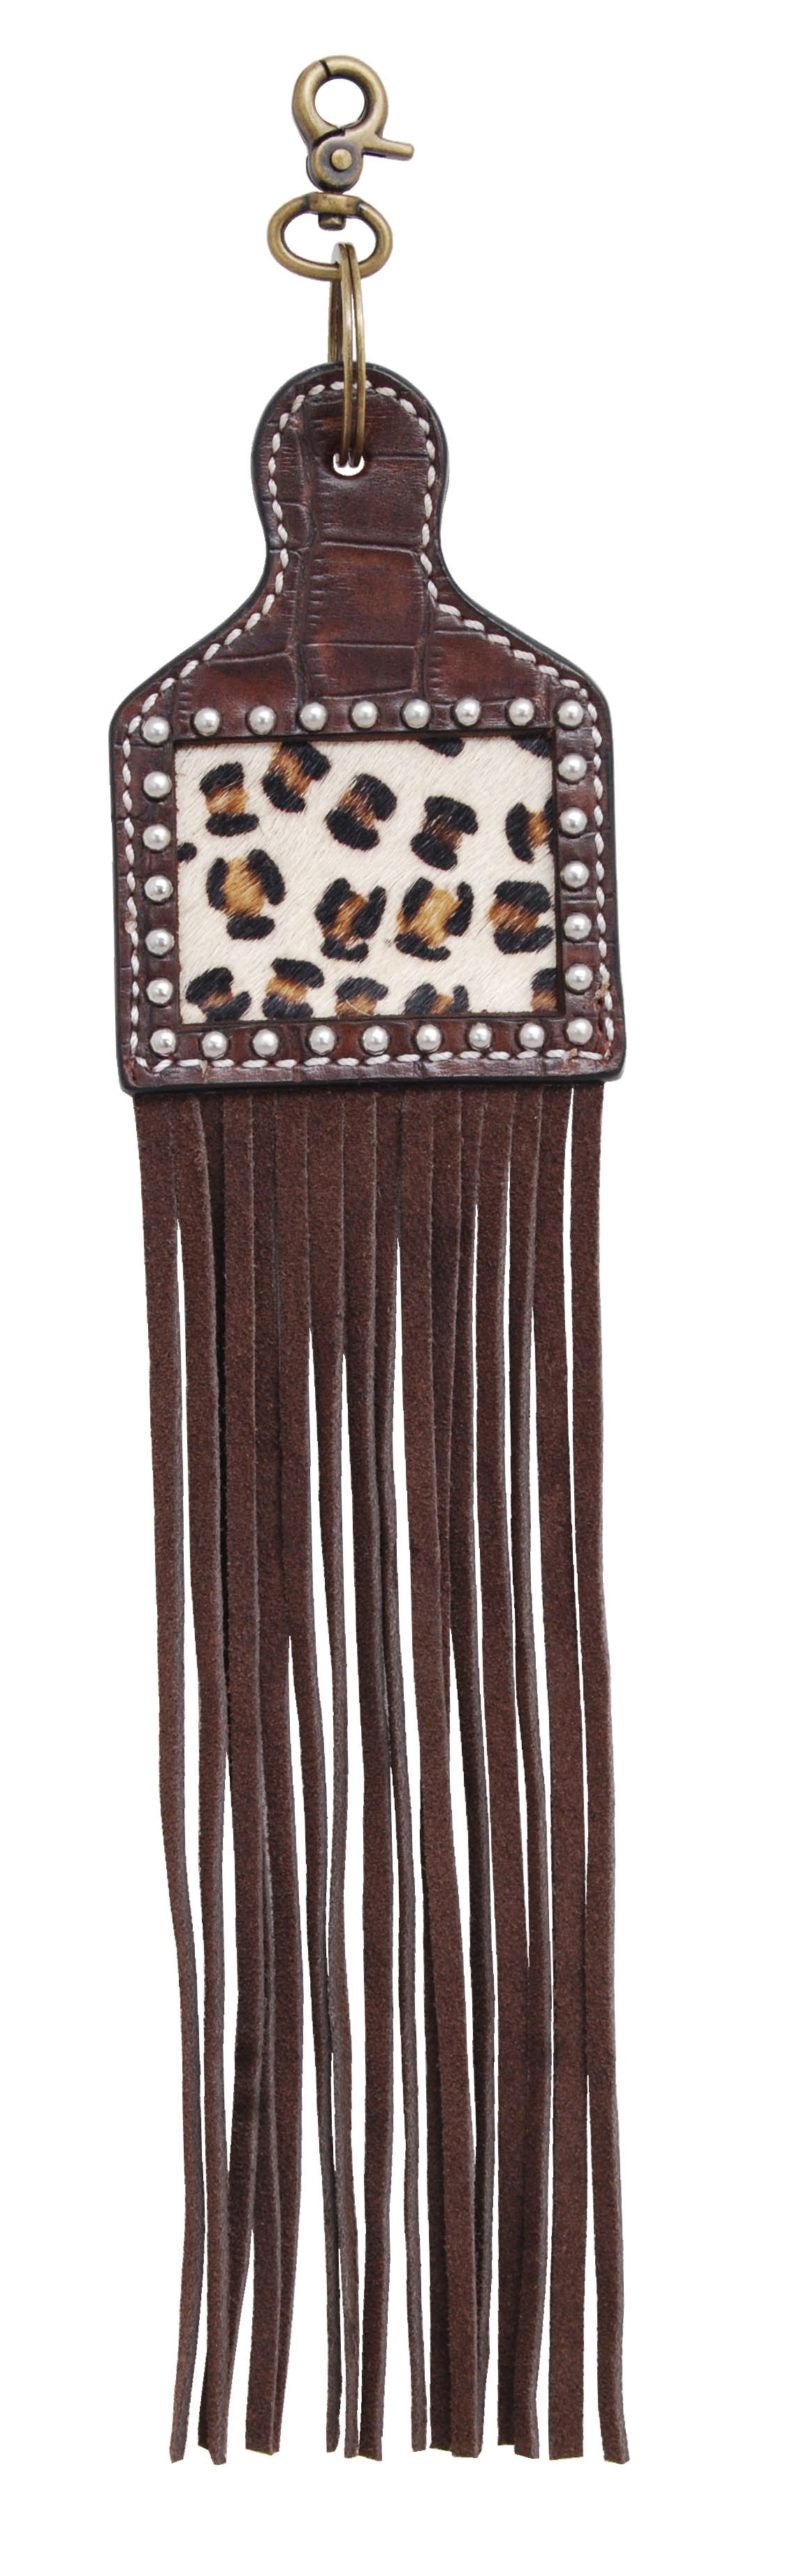 Gator and Leopard Hair W/ Suede Fringes Saddle Charm